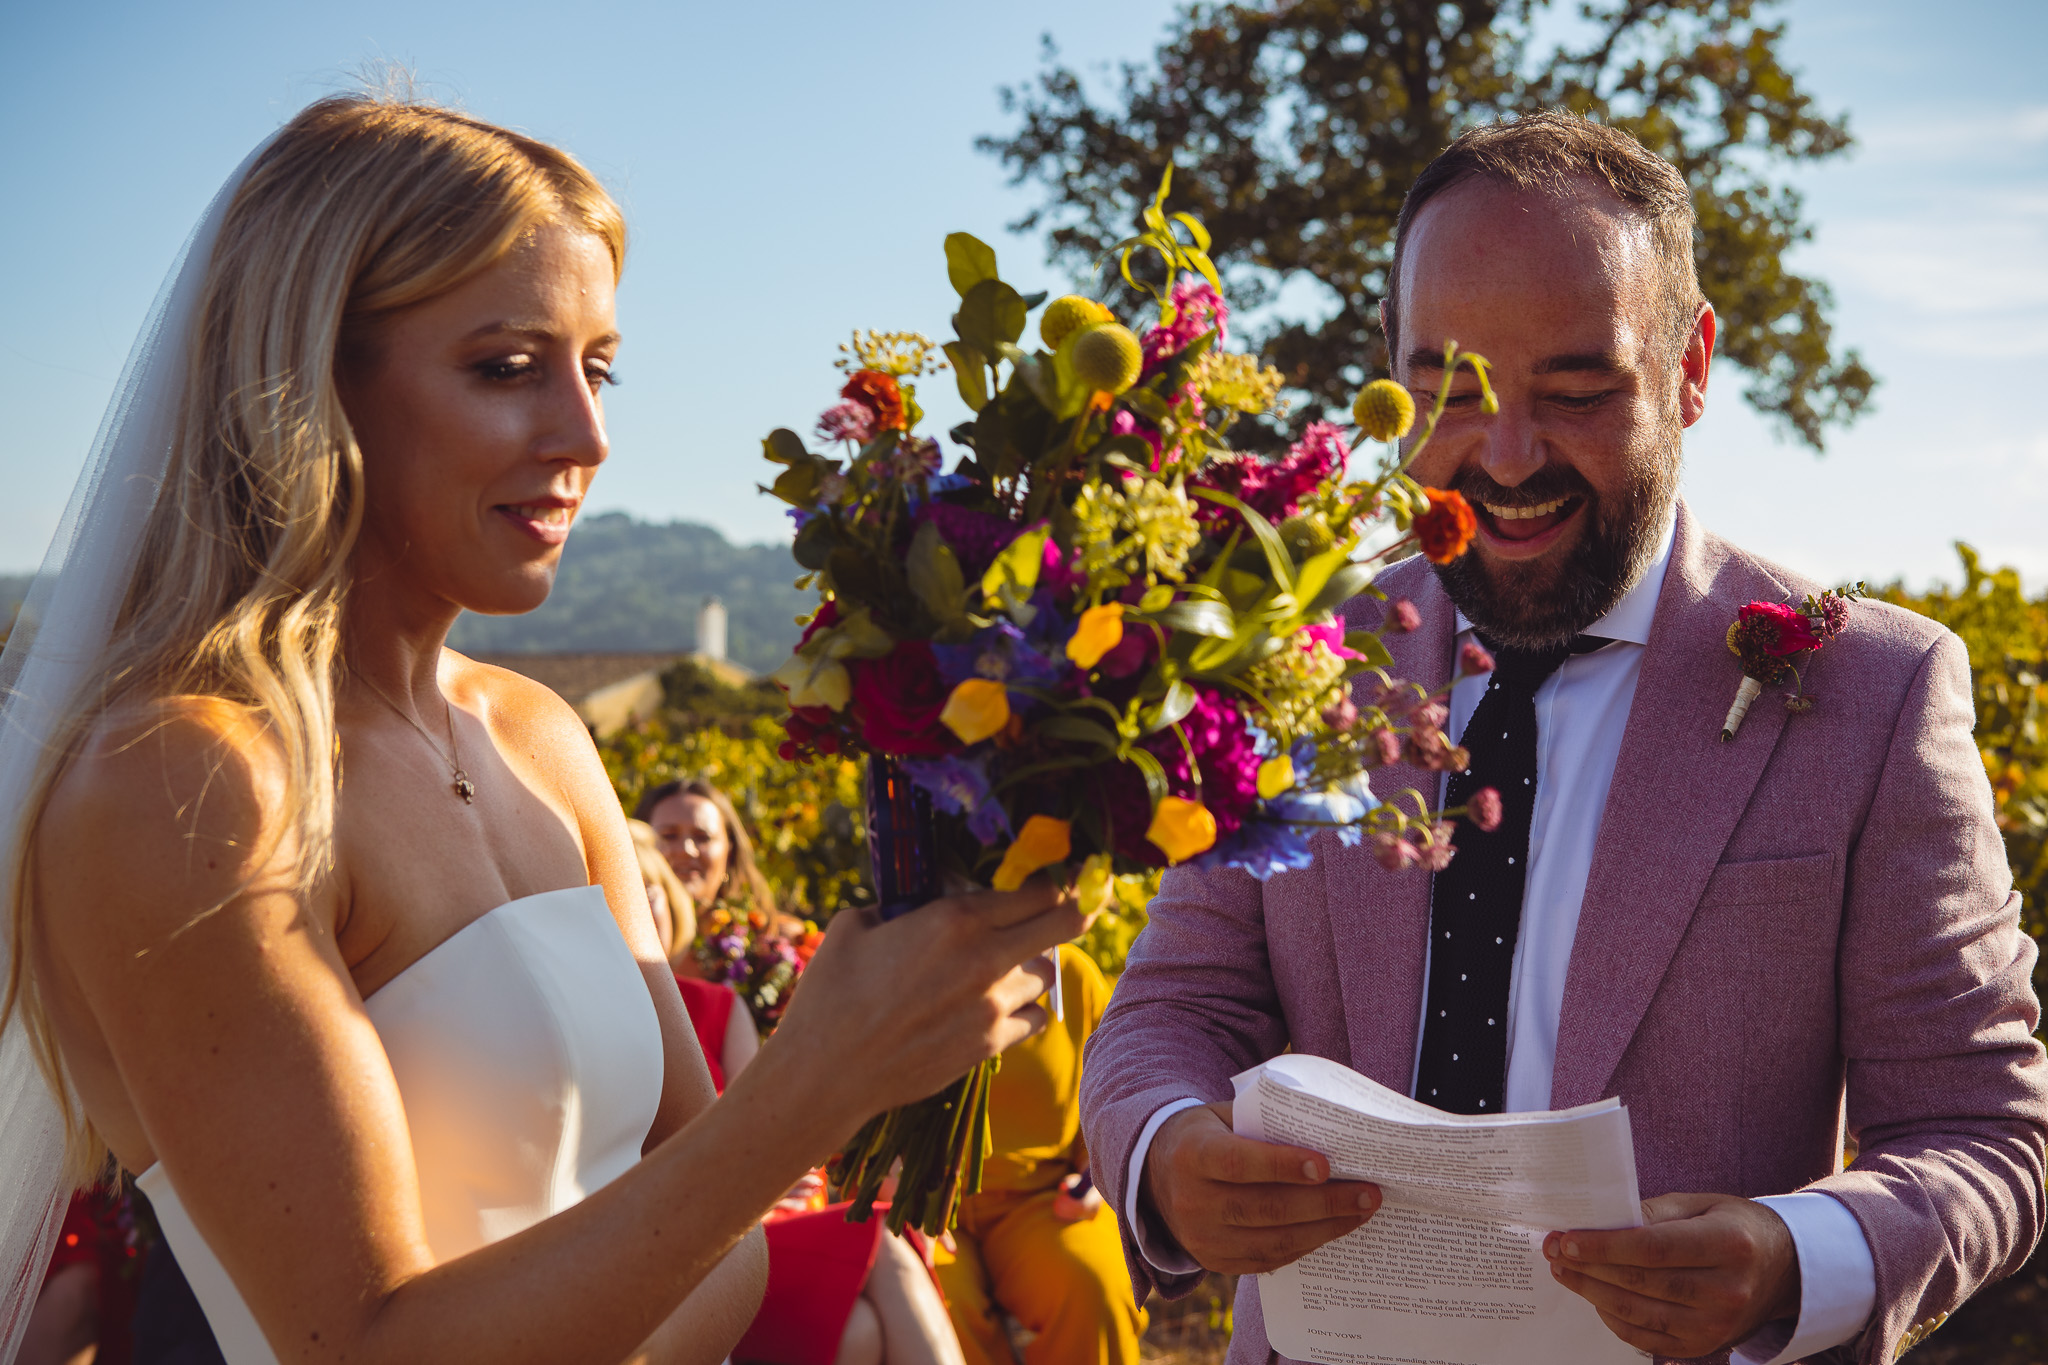 The groom reads of his vows to the smiling bride at the wedding ceremony in Ambelonas Vineyard, Corfu